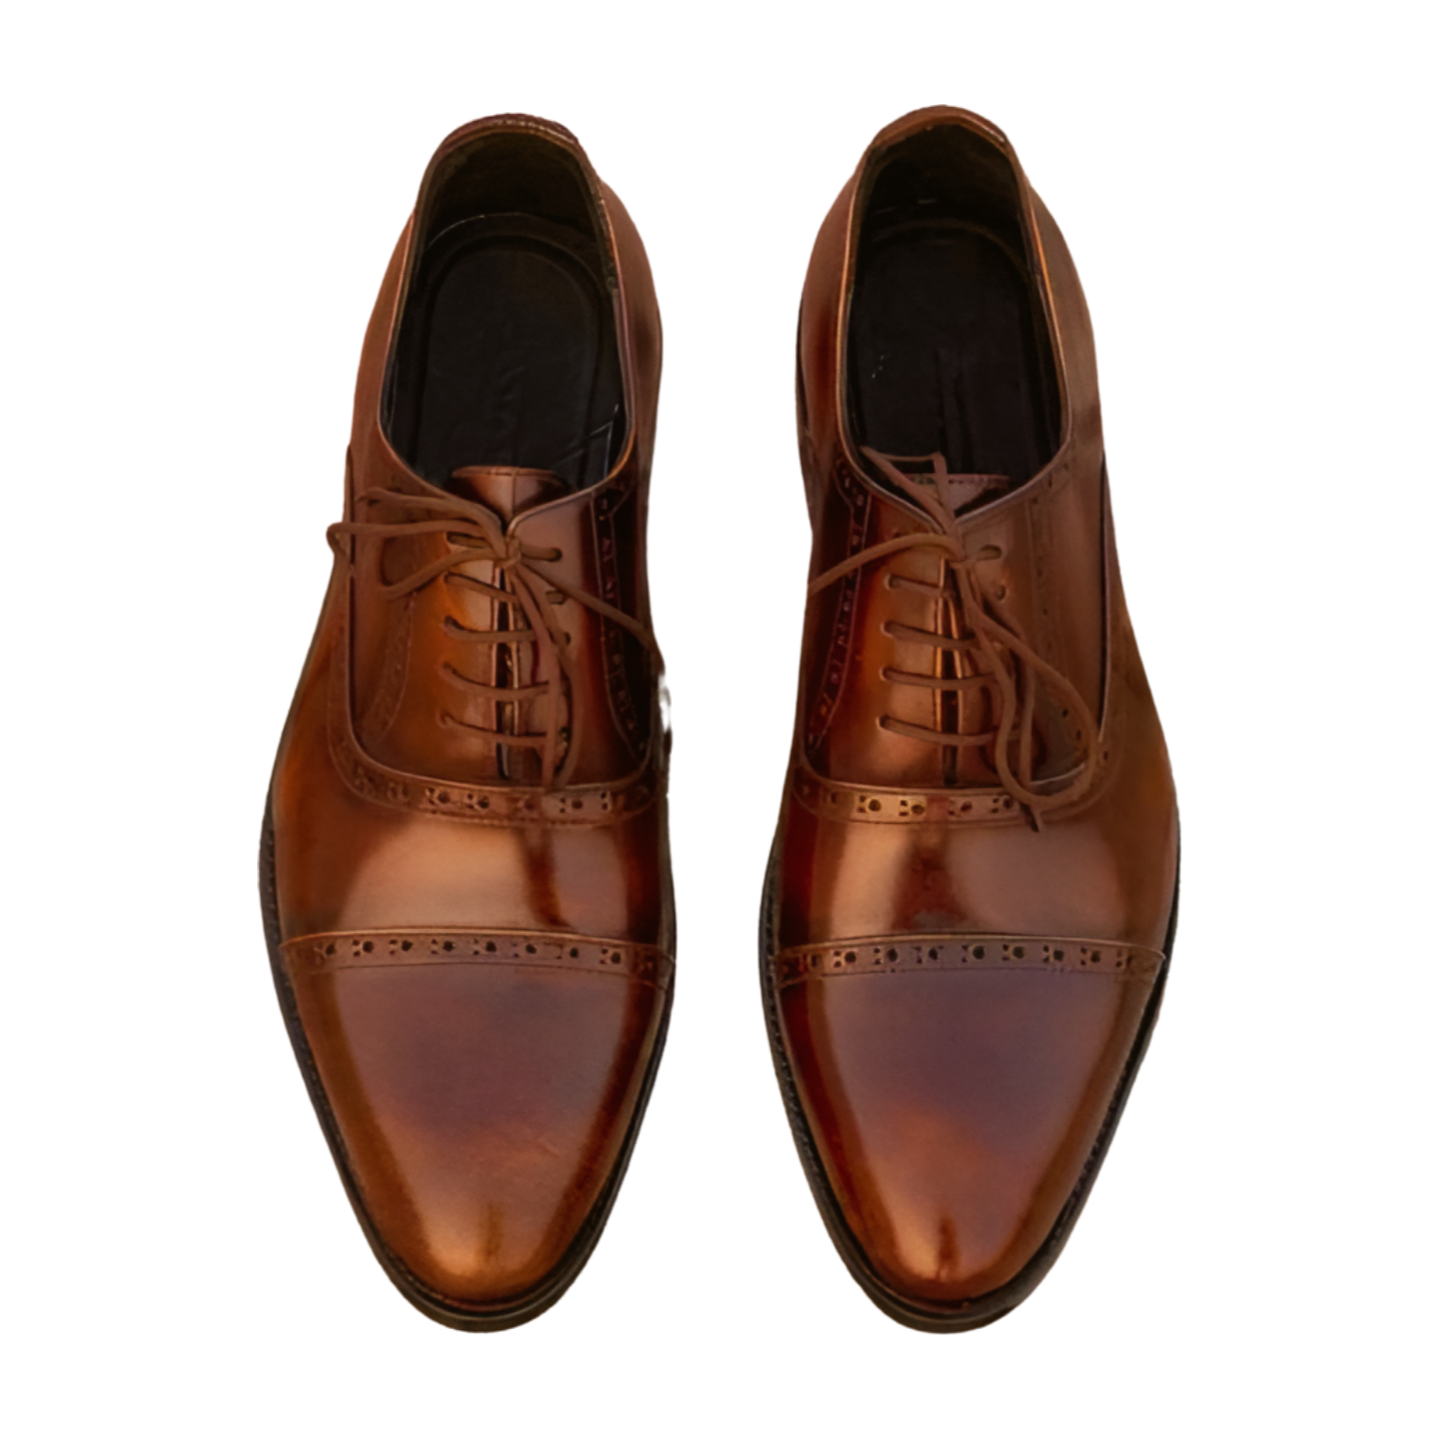 Semi Brogue Oxfords - Two-tone Mustard | Handmade Leather Shoes